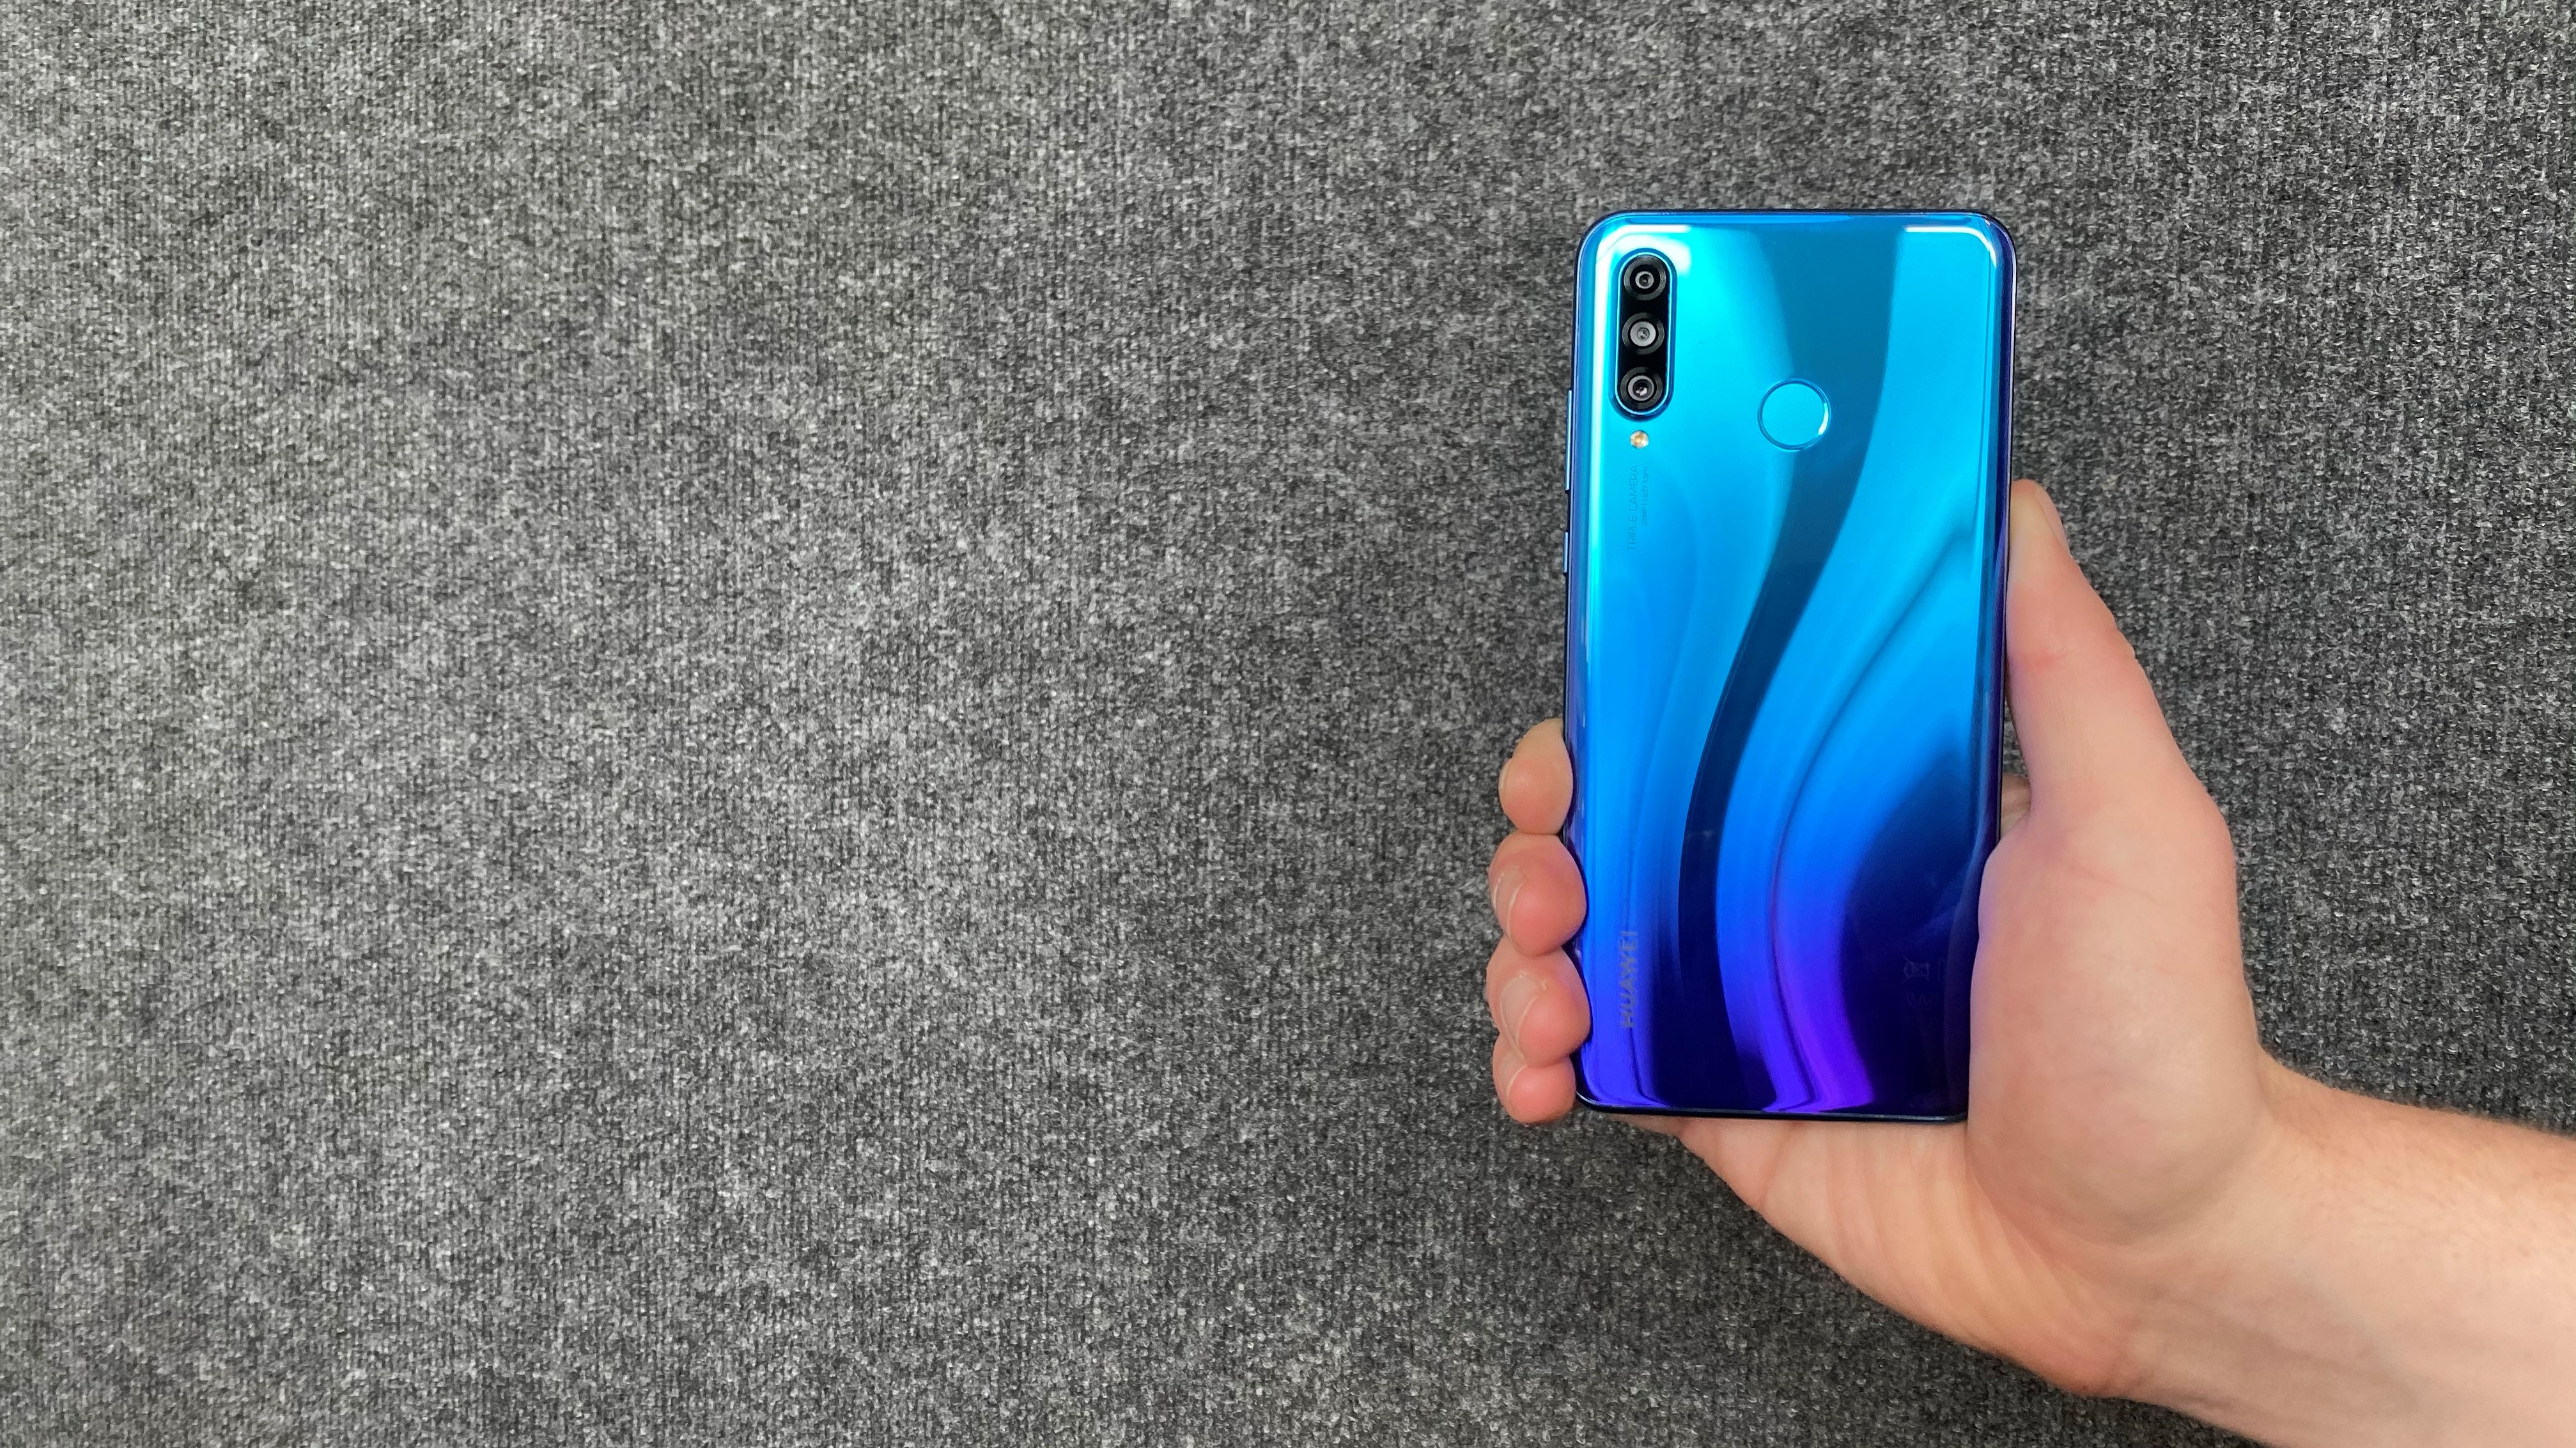 Huawei P30 Lite review: Lite on price and performance | Reviews.org